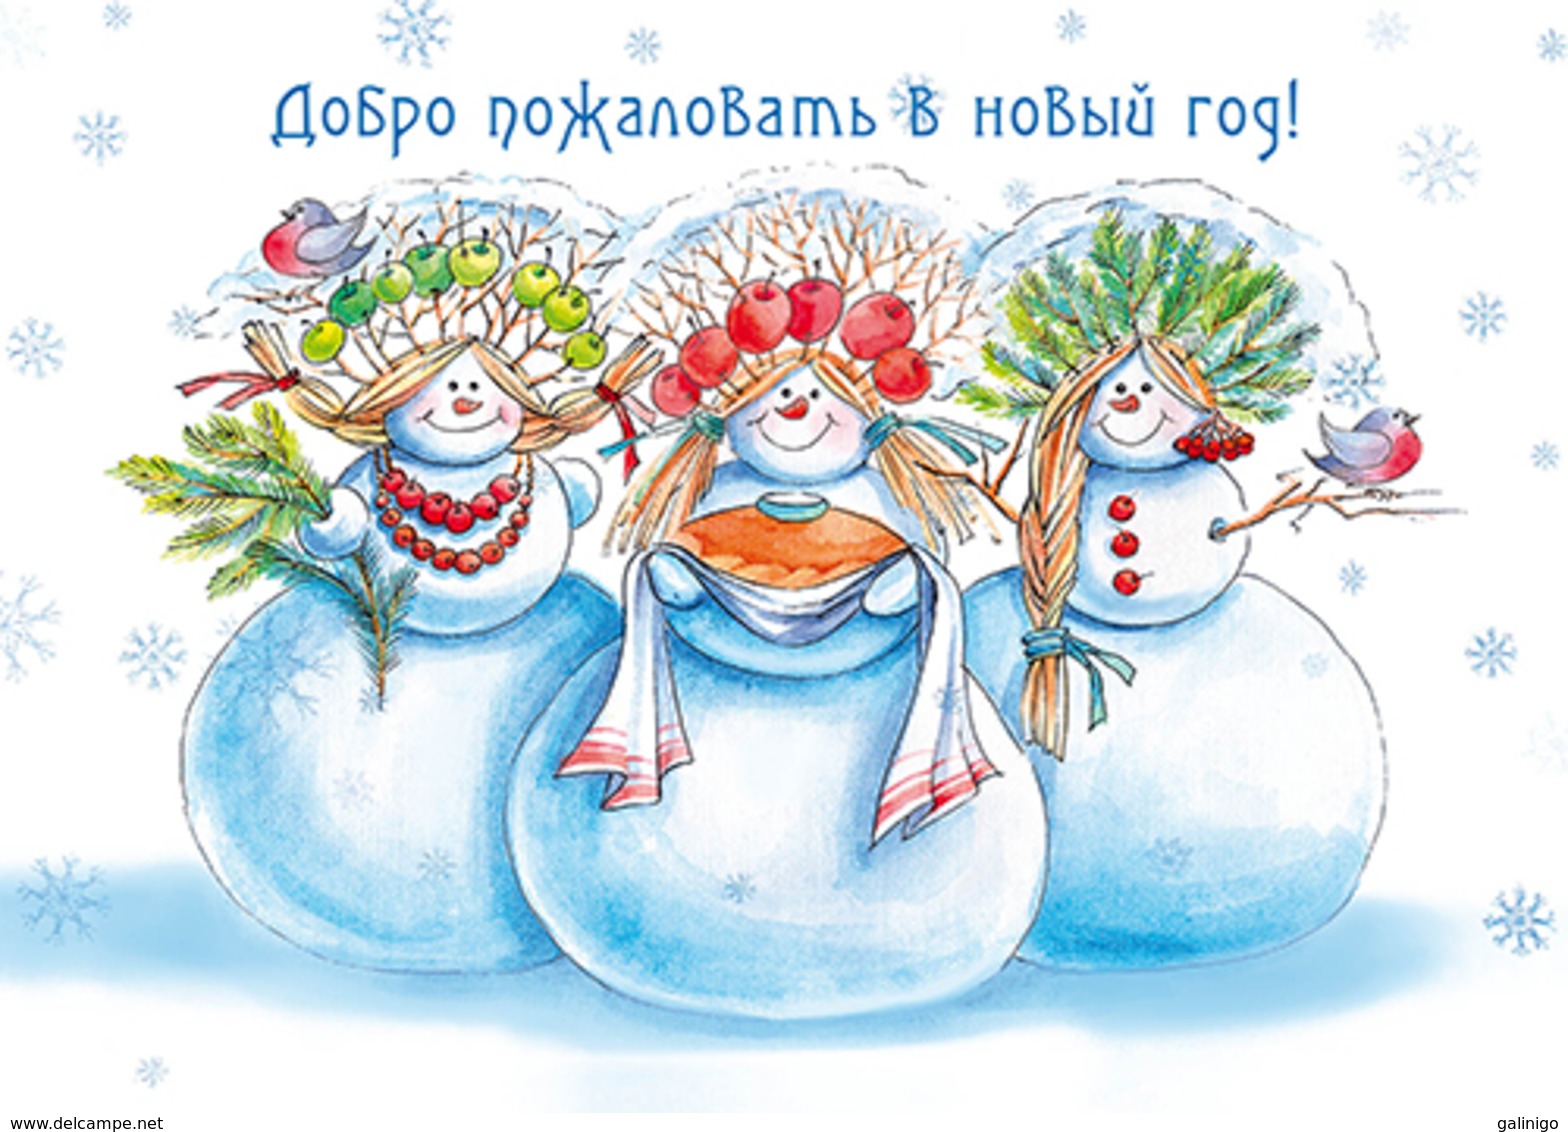 2019-327 Postal Card Without Stamp Russia Welcome To The New Year! Dressed Up Snowmen Greet Guests - Rusland